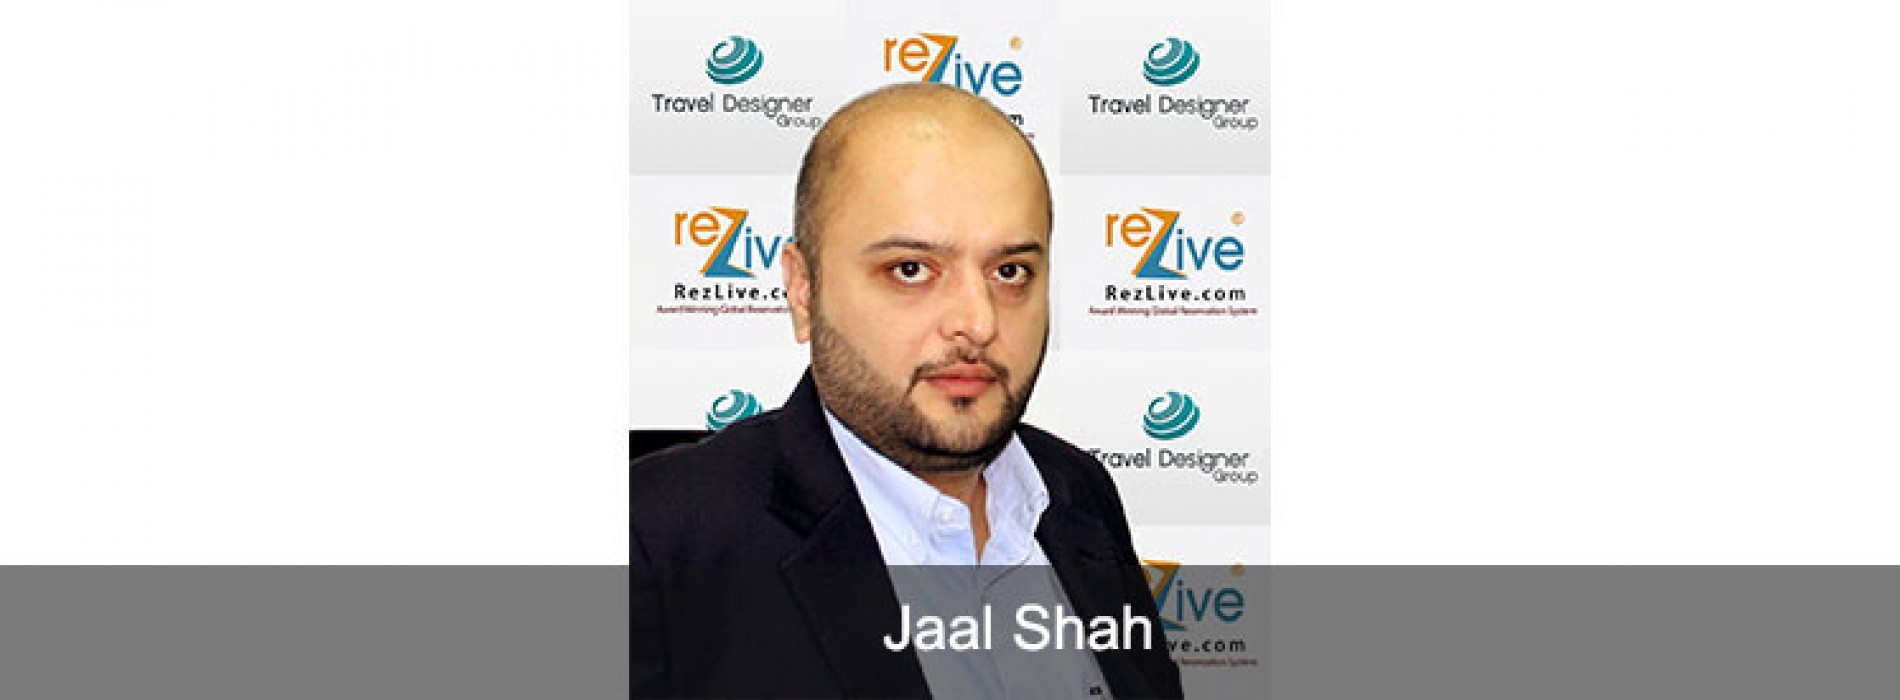 RezLive.com to have a strong presence at ATM 2015